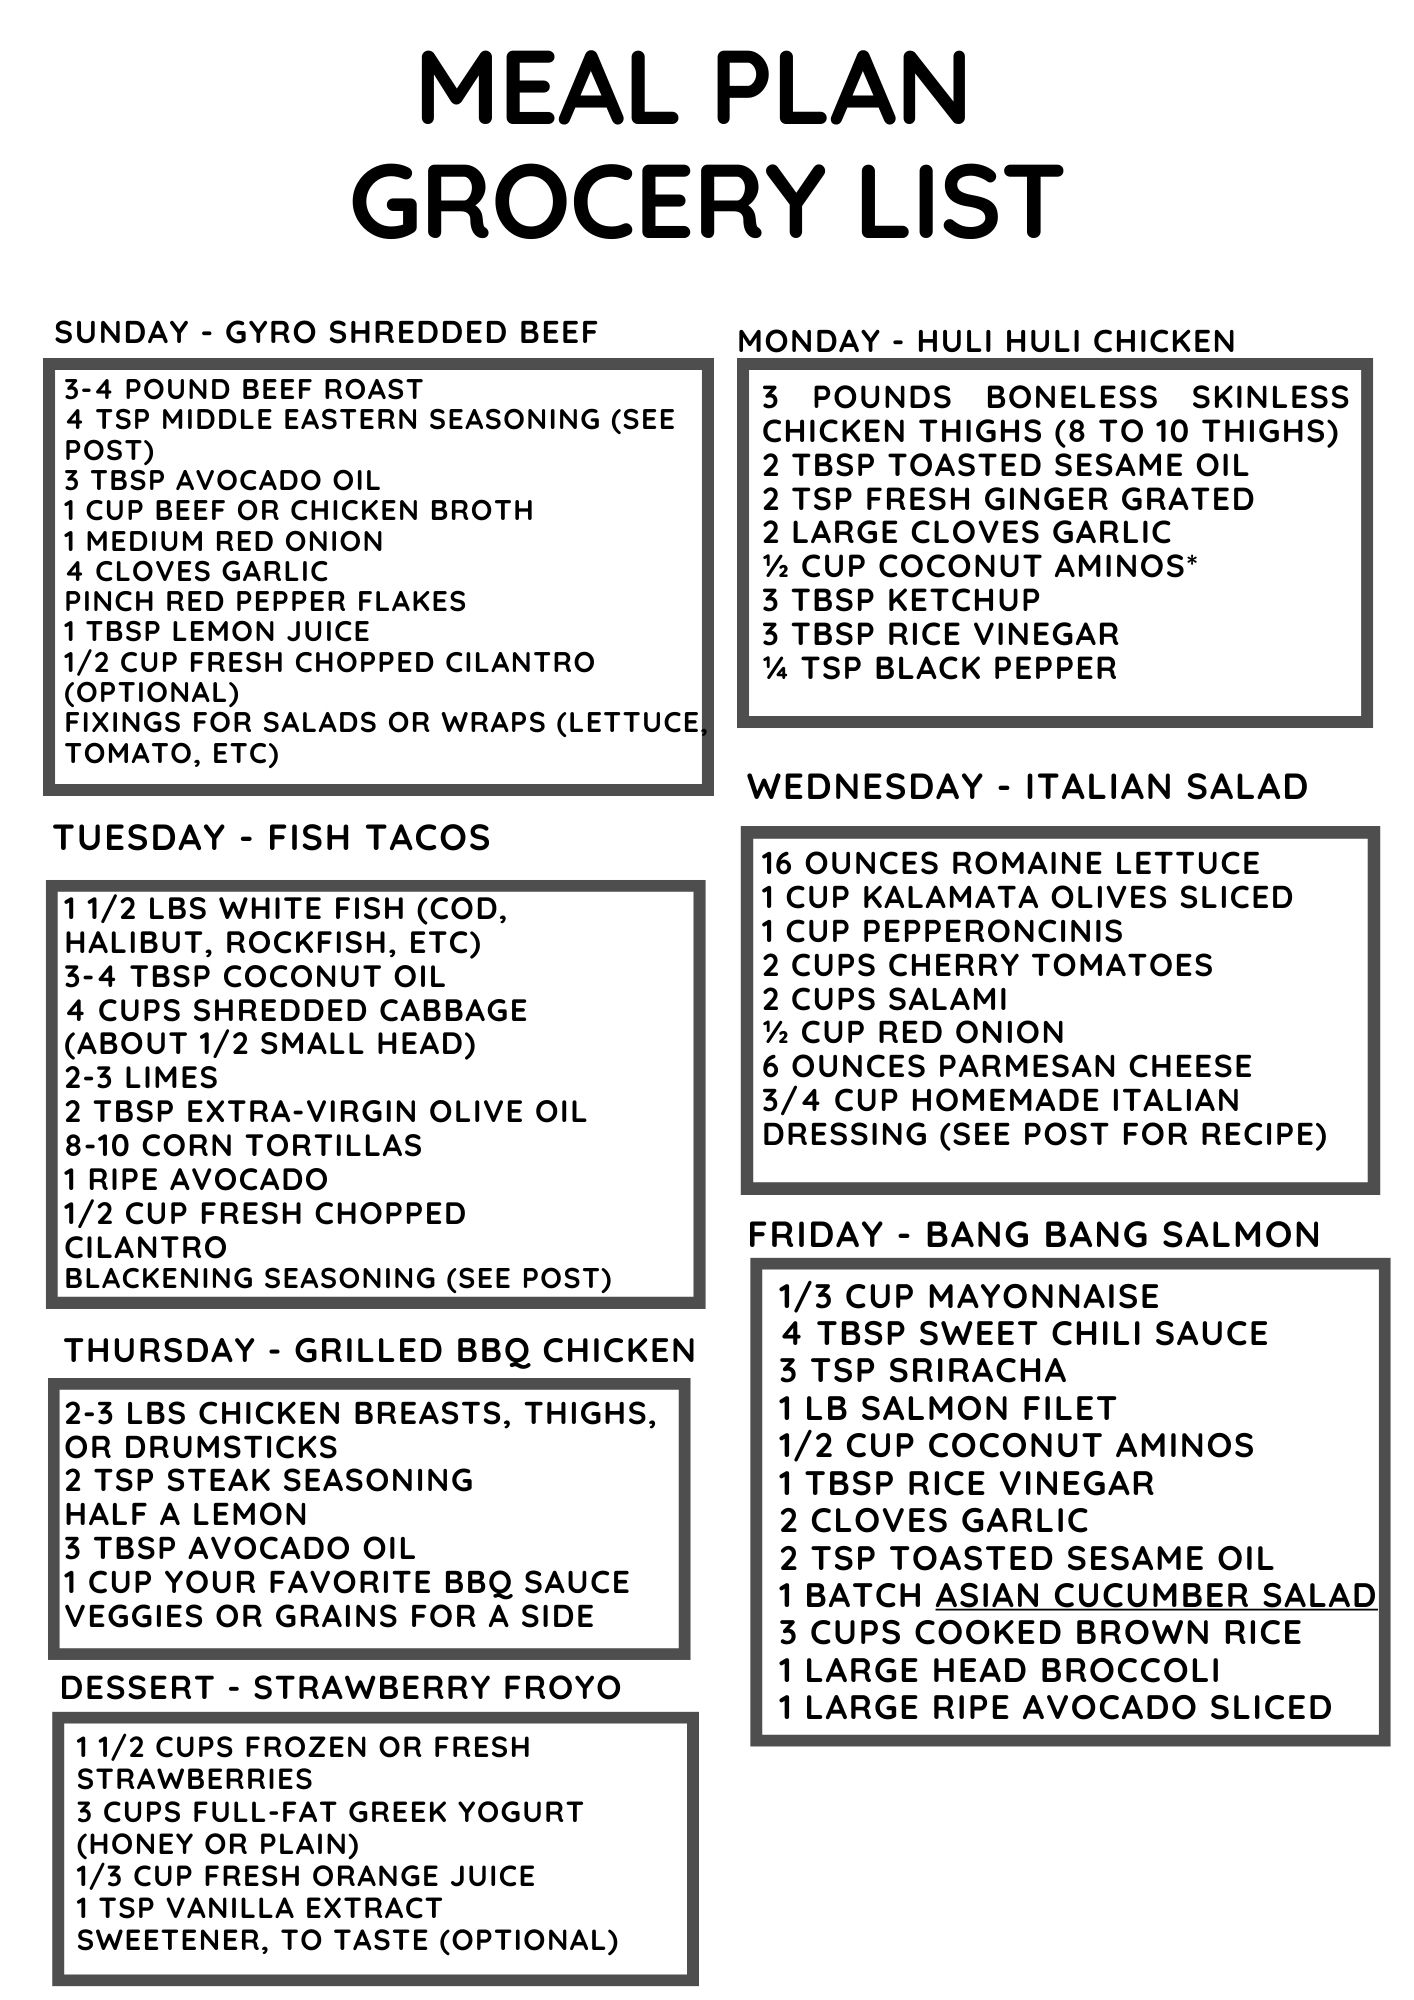 Grocery list for meal plan